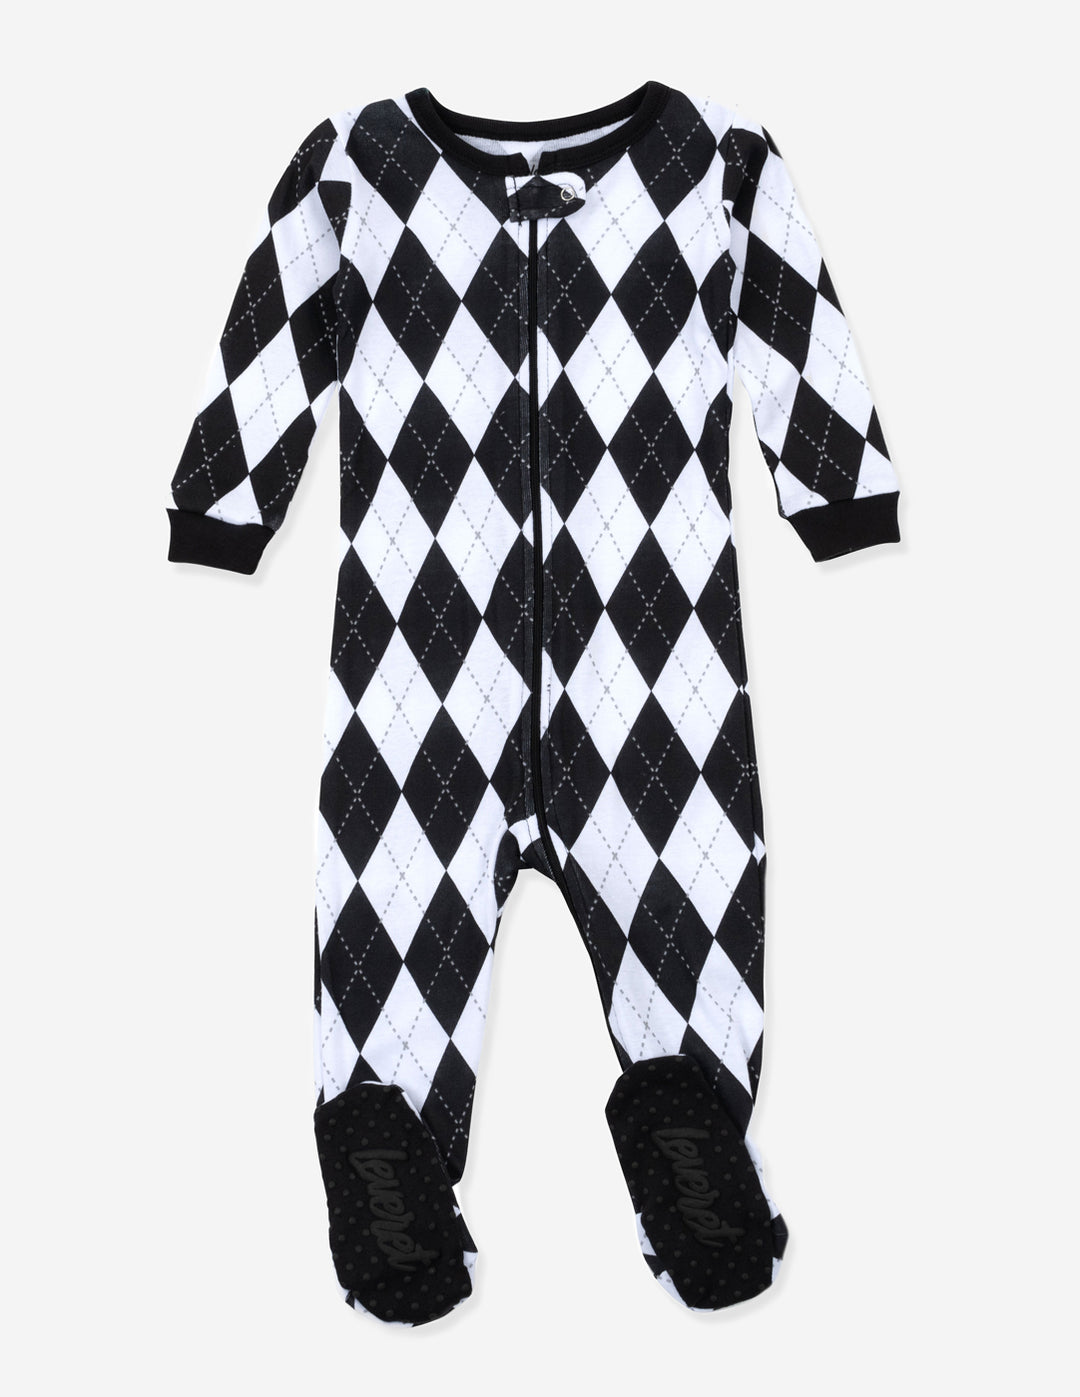 black and white argyle baby footed pajamass